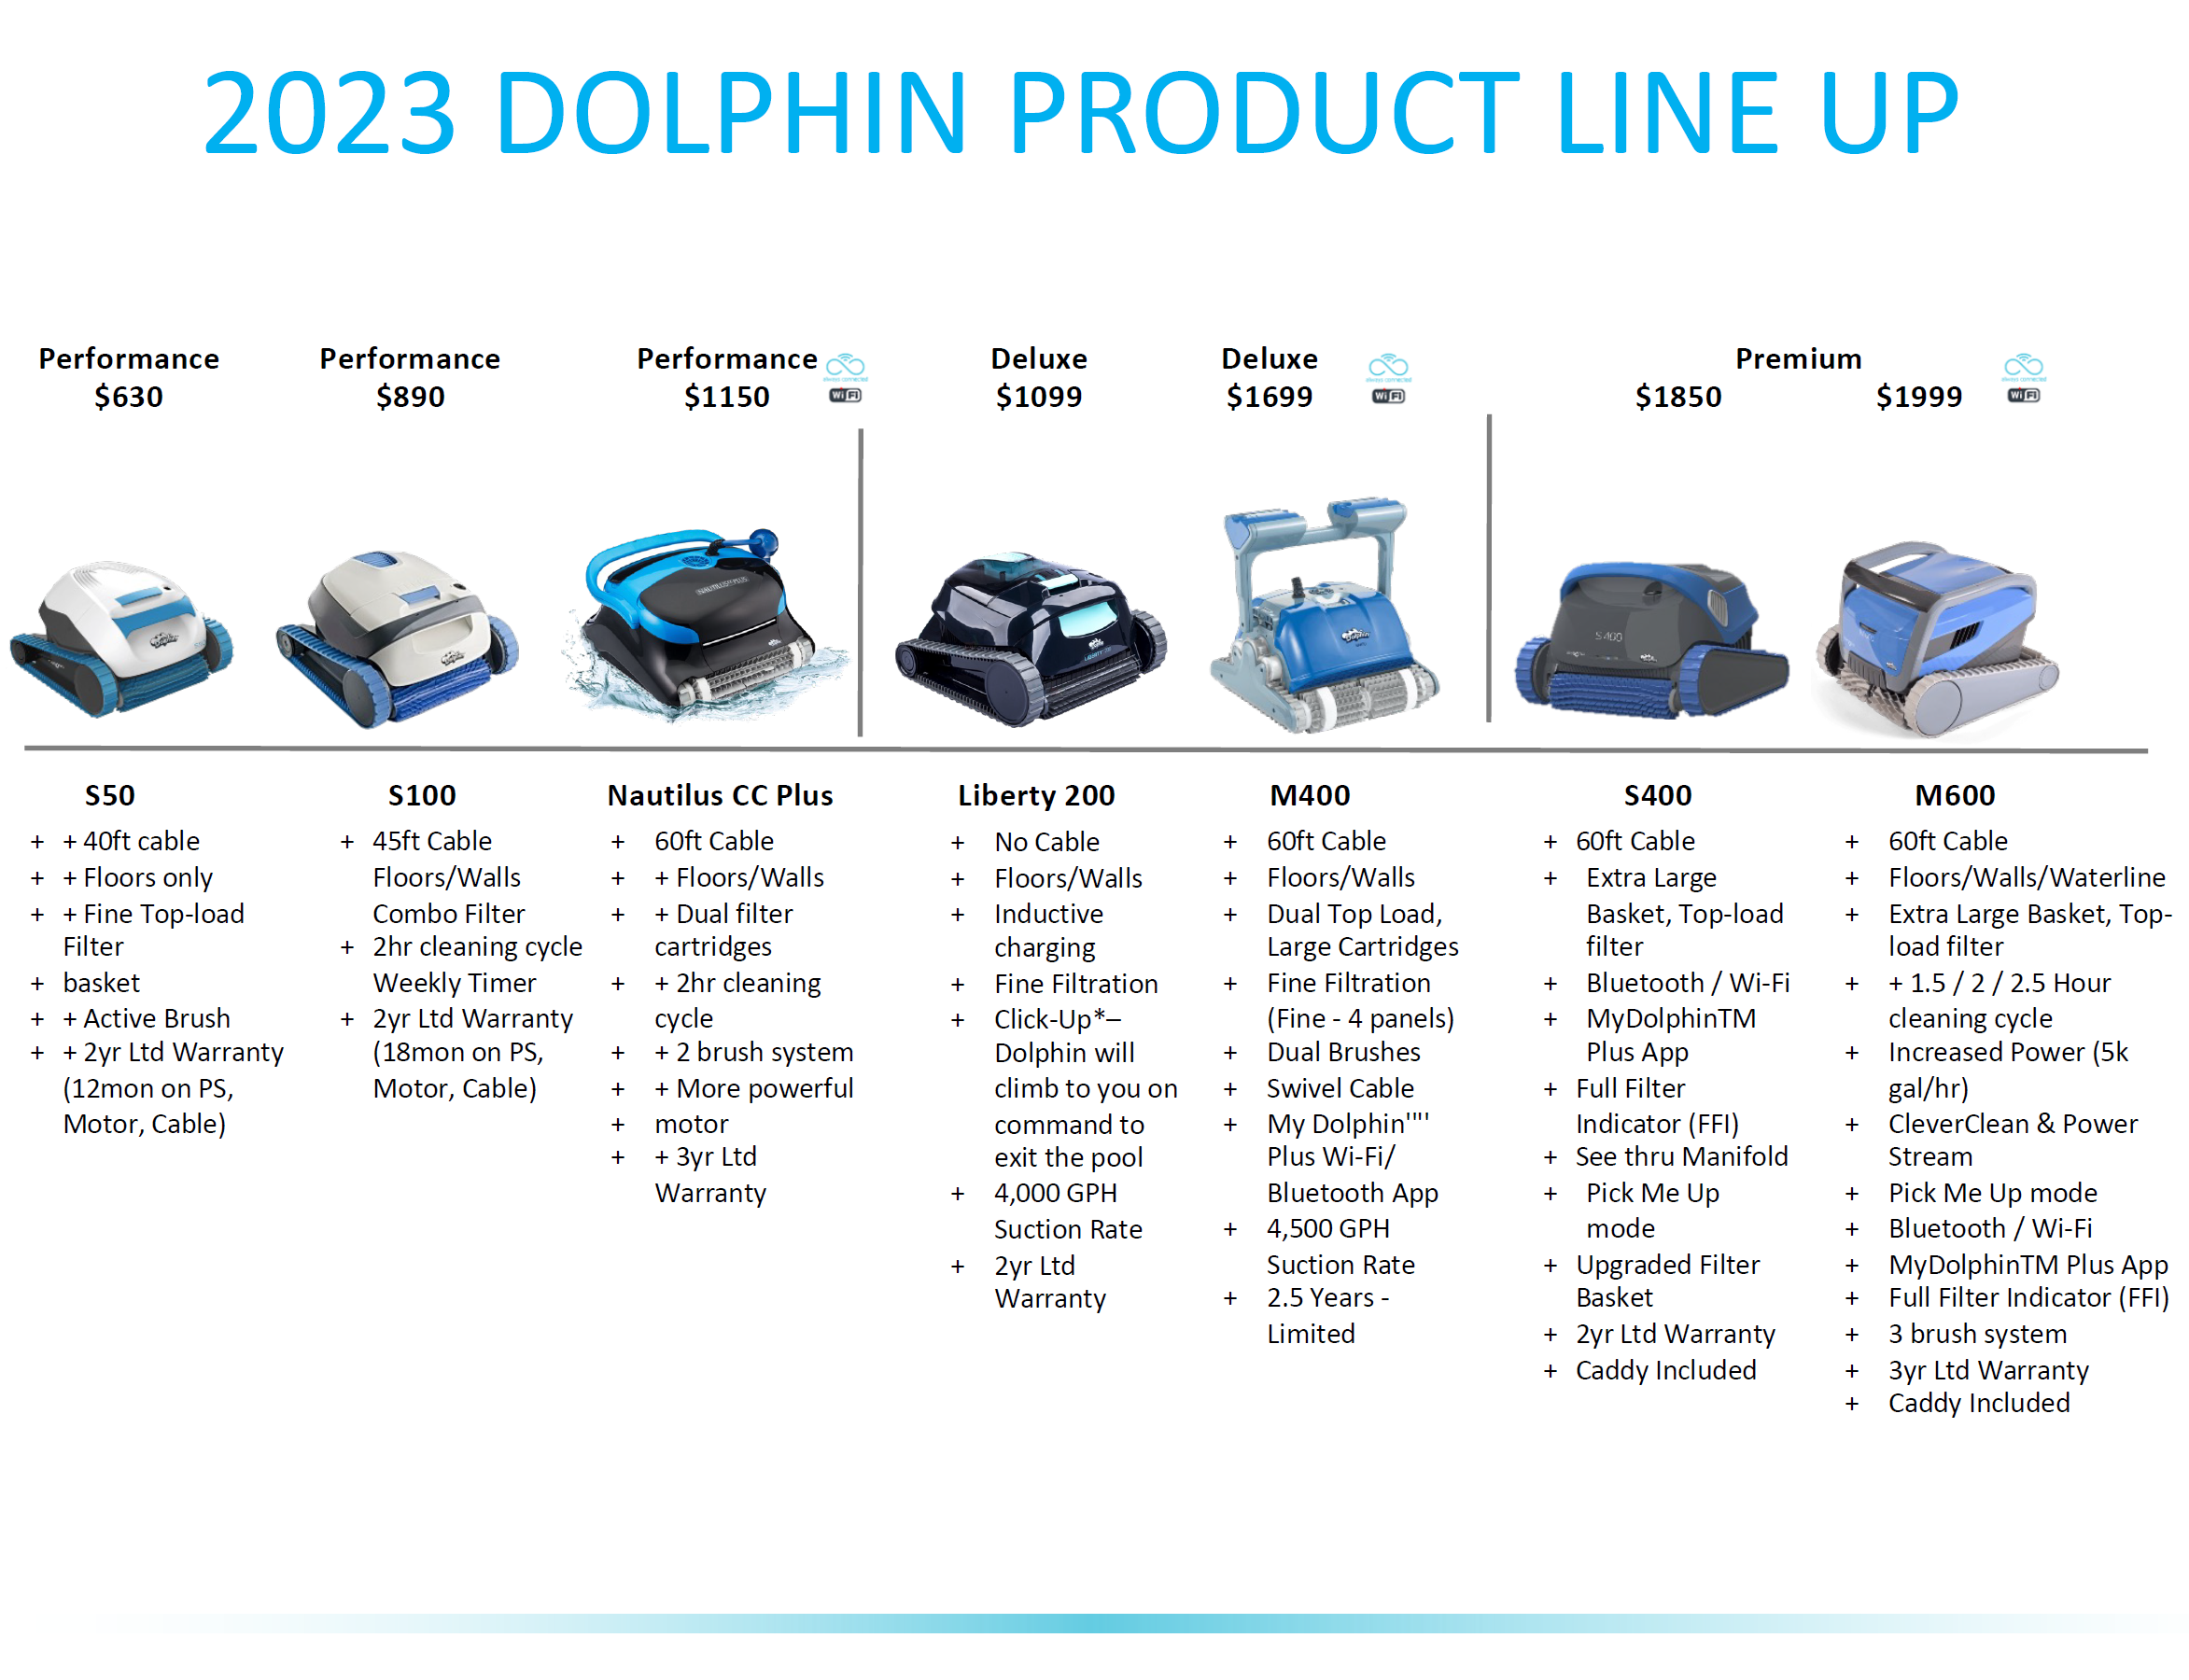 Dolphin Product Line Up